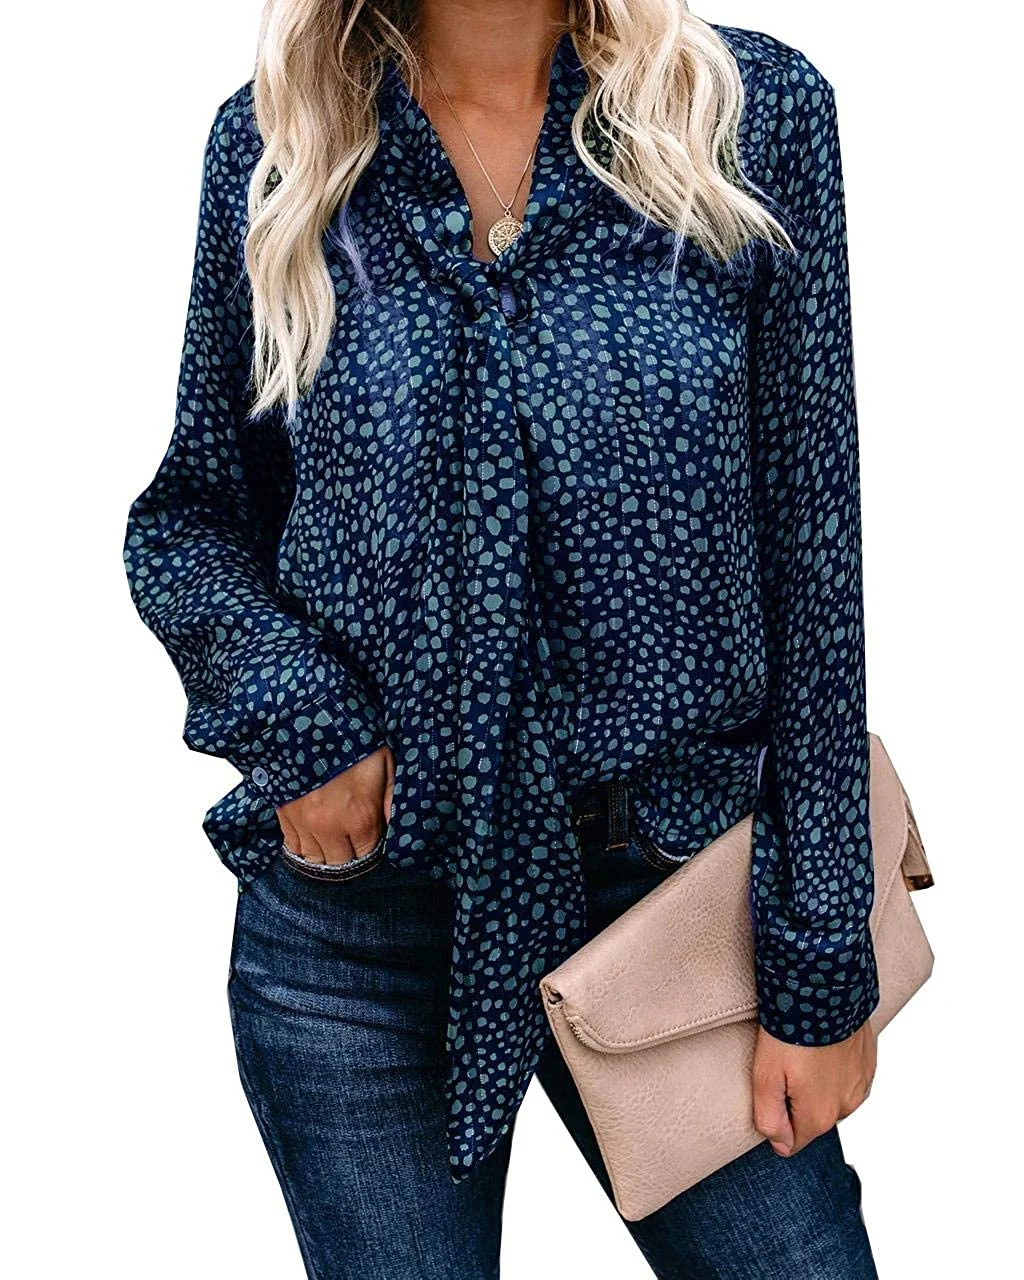 Womens Casual Leopard Print Bow Tie Neck Long Sleeve Chiffon Blouse Tops